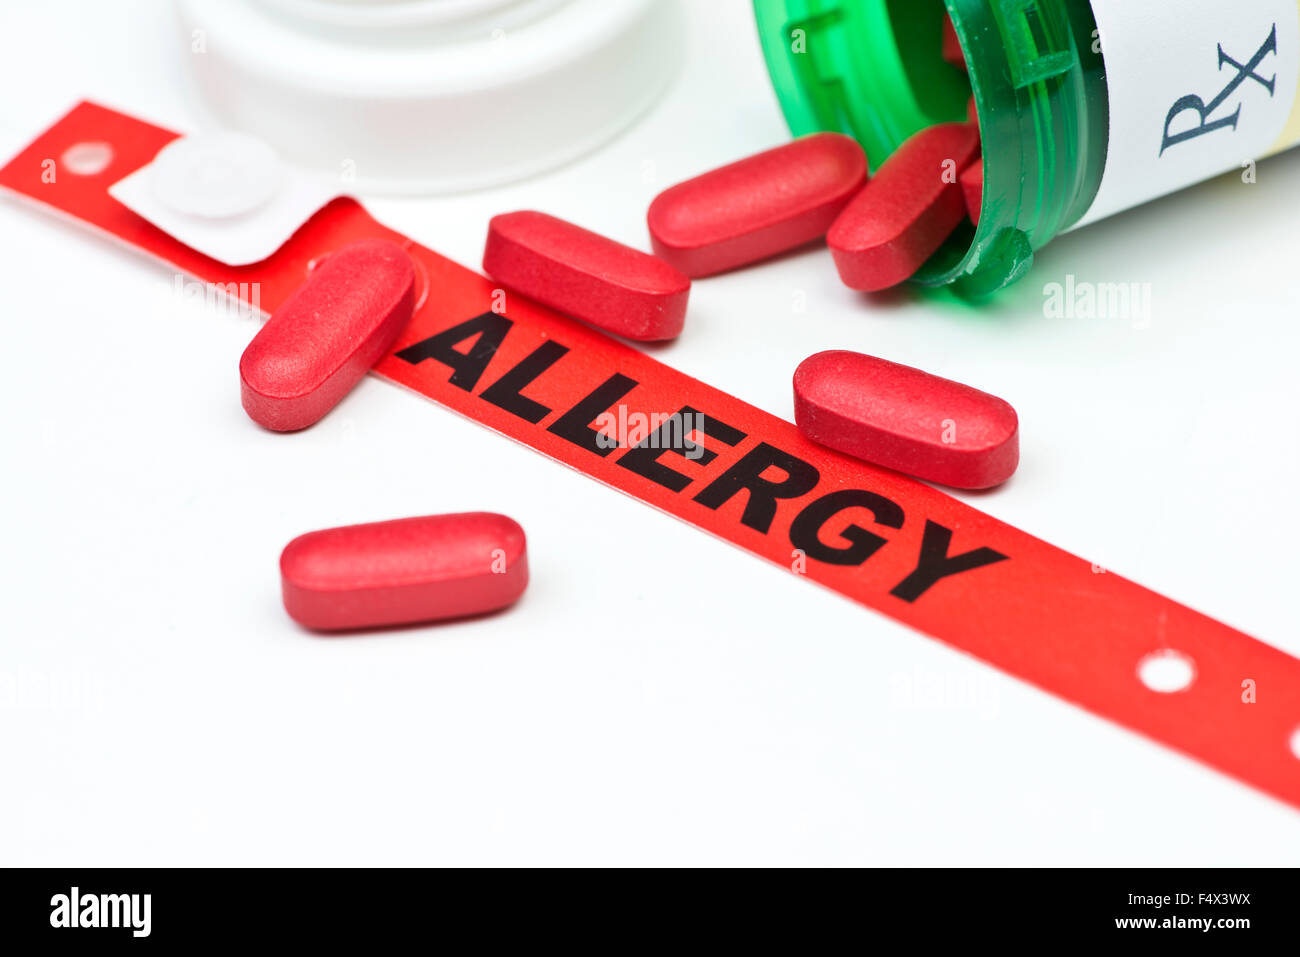 Allergy alert hospital wristband with medication and prescription bottle. Stock Photo